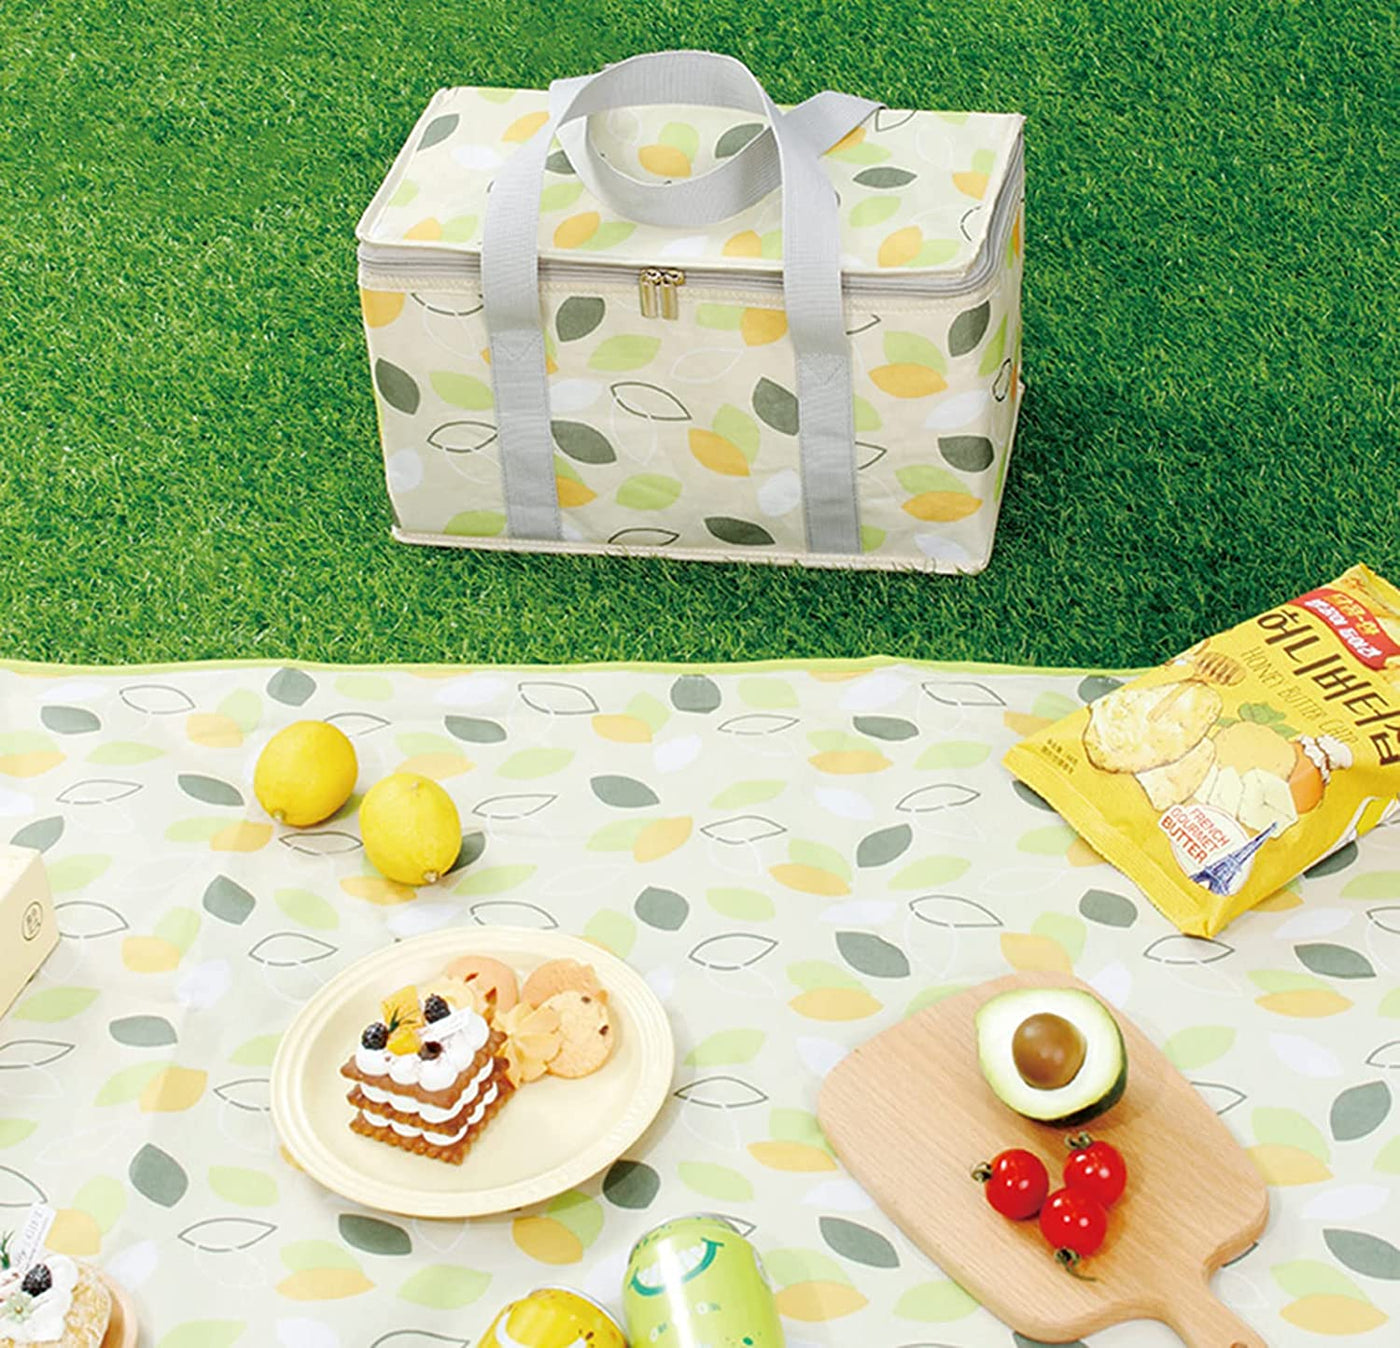 Large-Capacity Portable Outdoor Thermal Picnic Lunch Bag - Yellow Multi Leaf